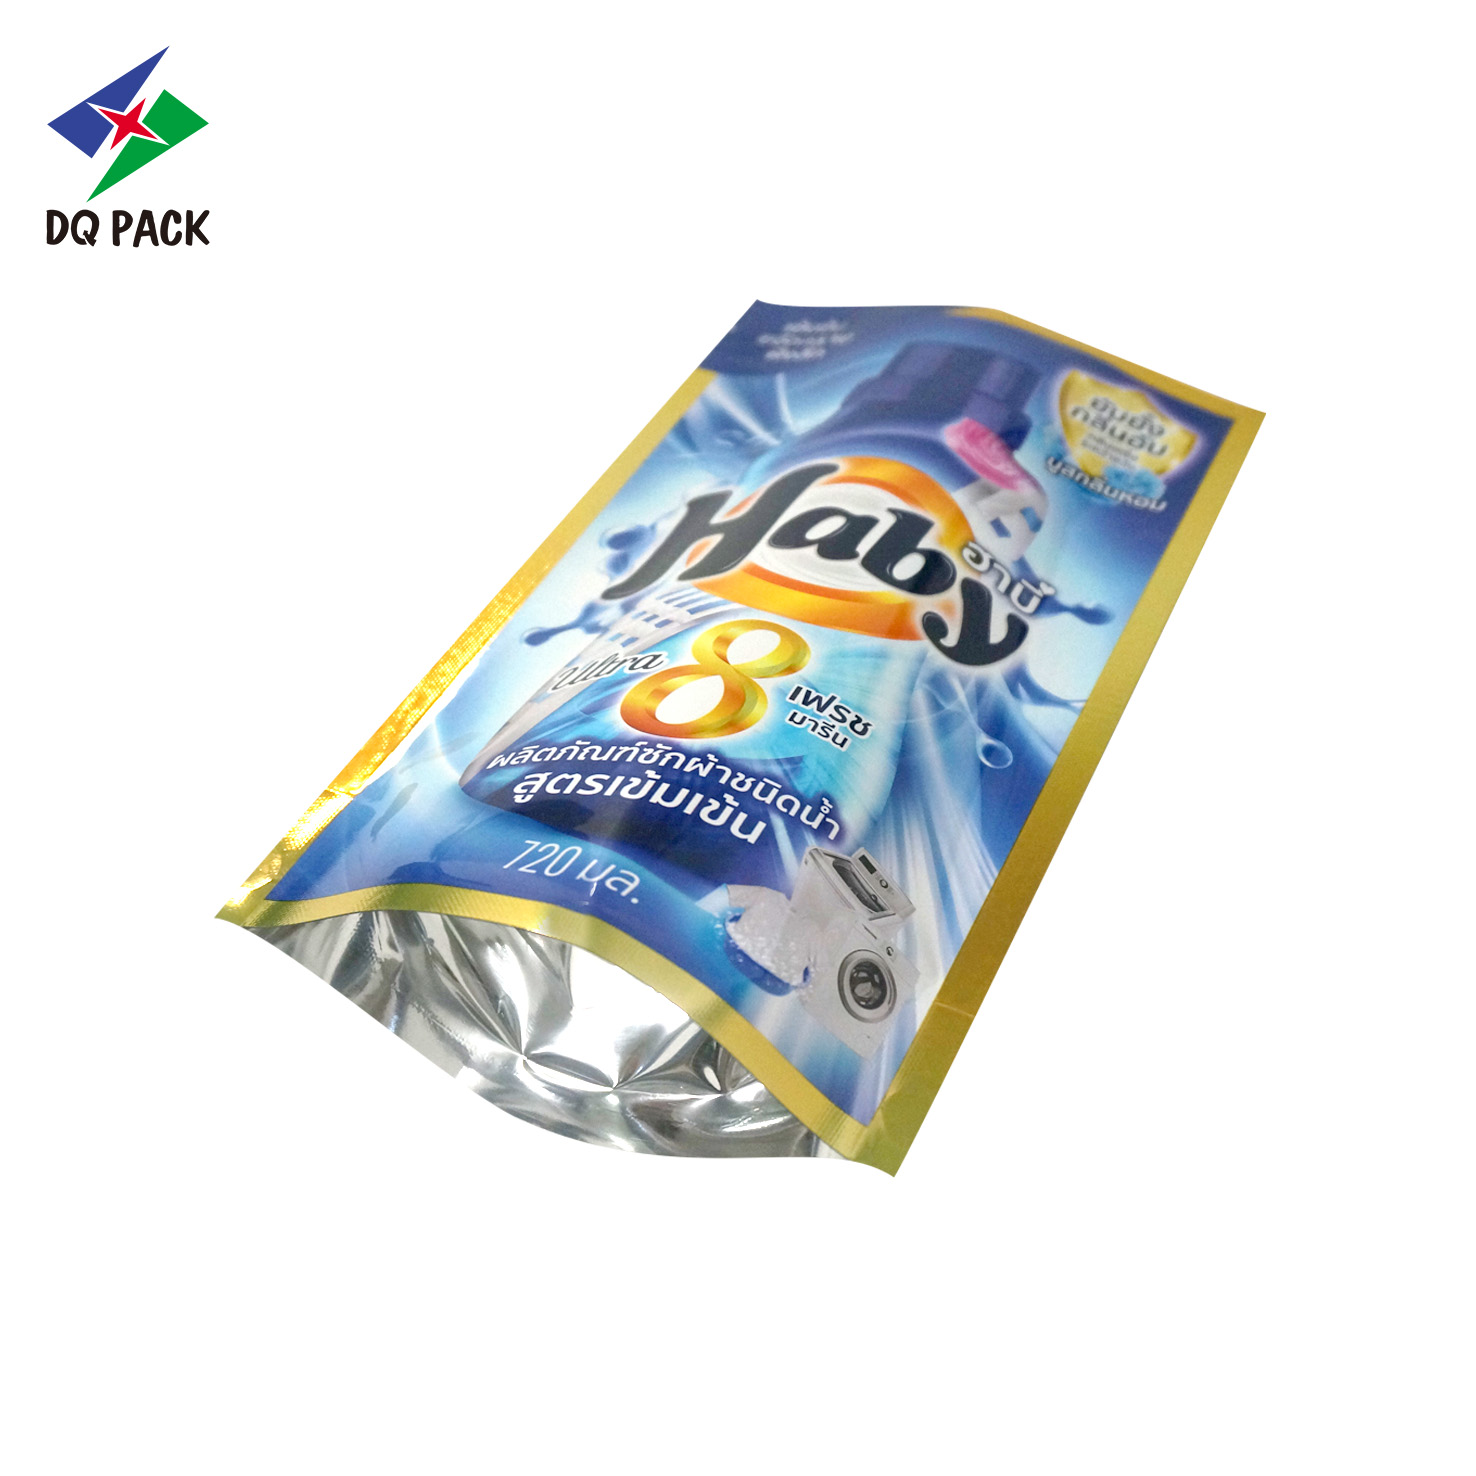 DQ PACK Laundry Detergent Stand up bag Hot Seal bag hot sale packaging bag For Chemical